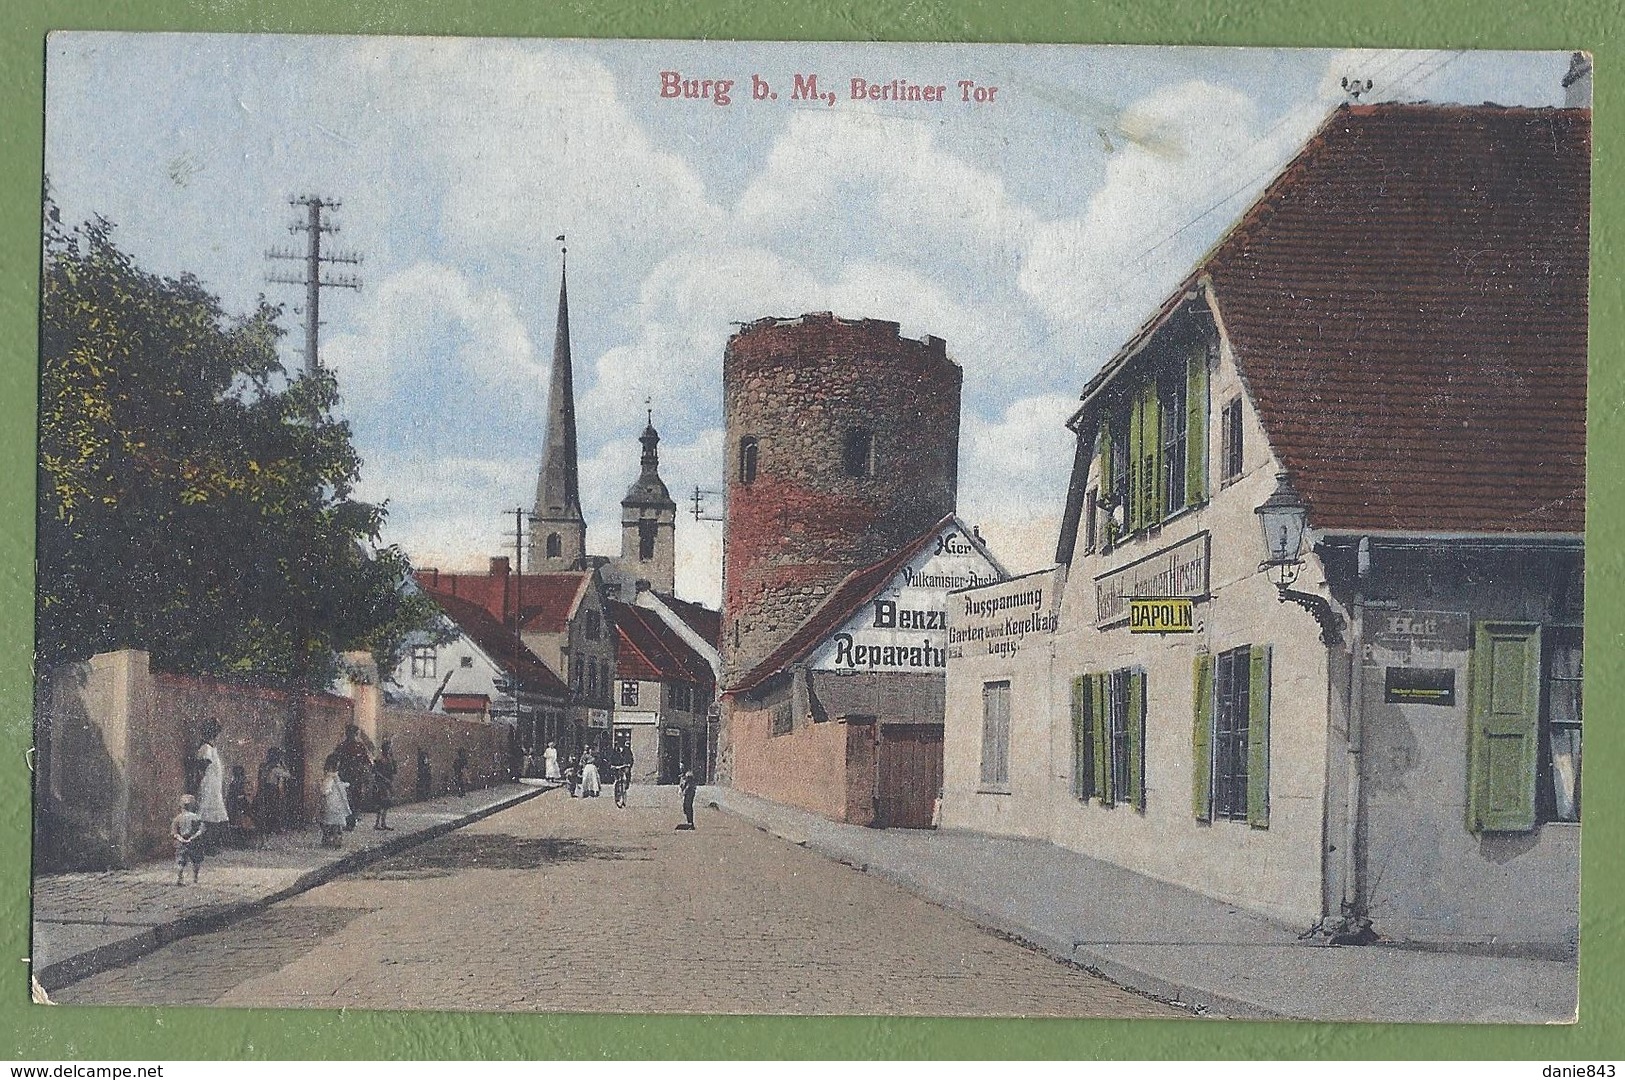 (ma) - CPA Couleur - ALLEMAGNE - BURG B. Magd. -  BERLINER TOR - Petite Animation - Carl H. Odemar / 75 - Burg